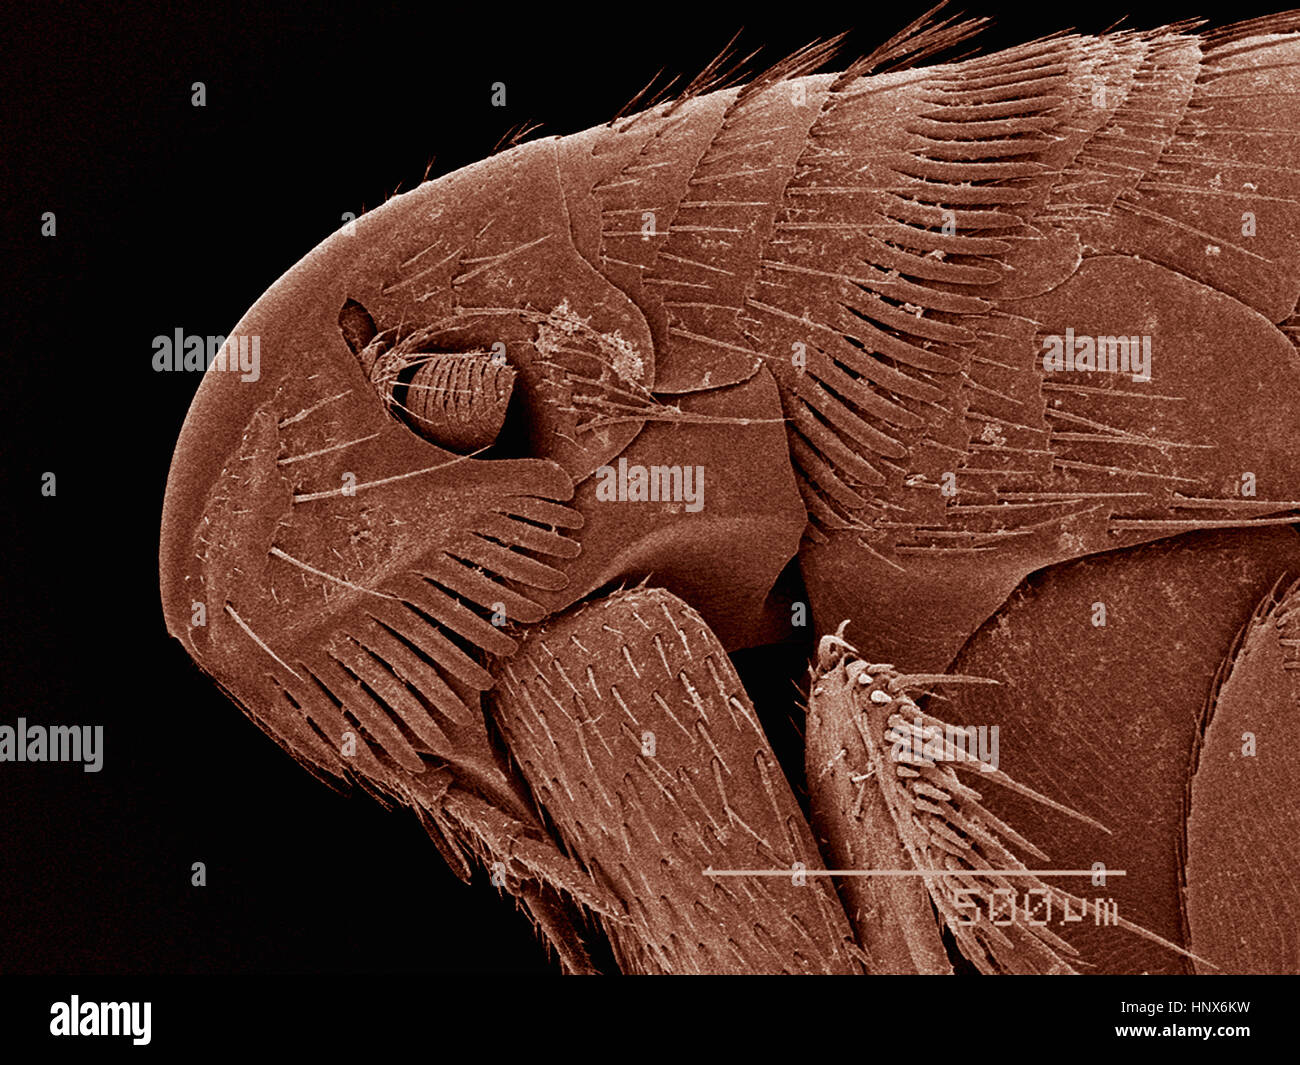 Scanning electron micrograph of the head of a flea (siphonaptera) Stock Photo